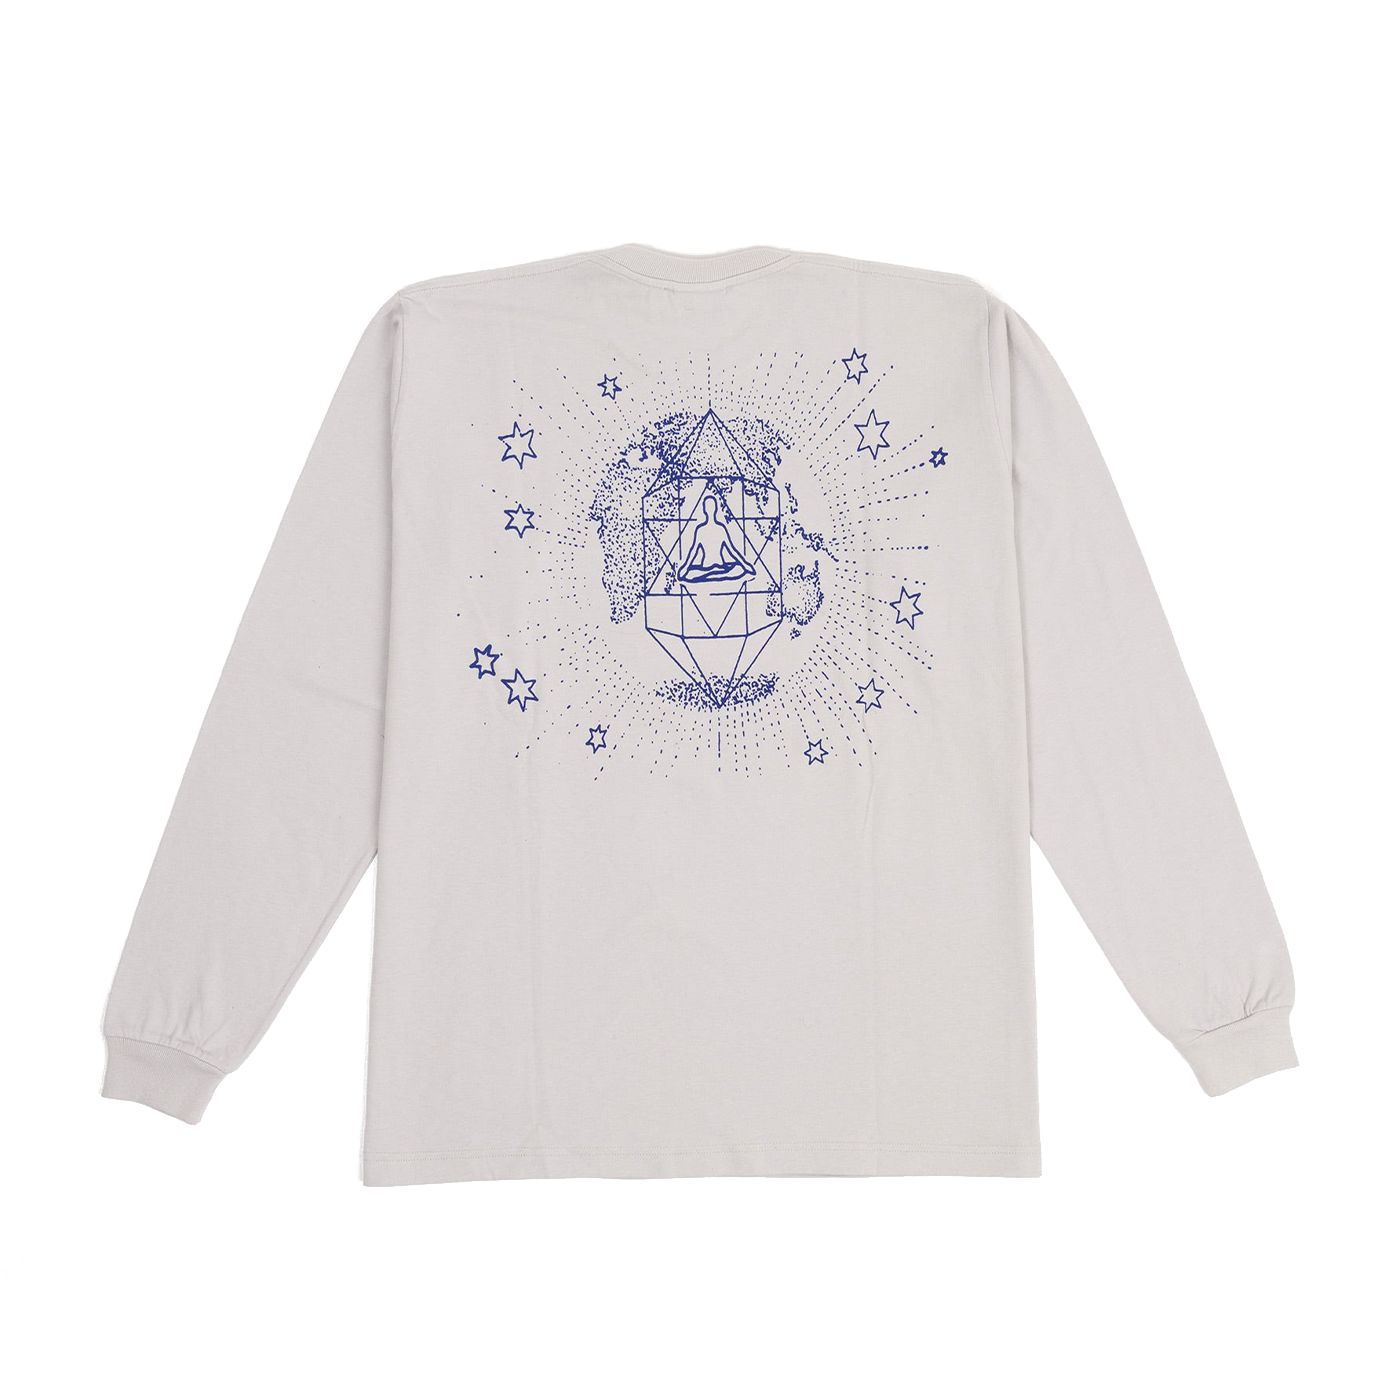 Cruystals For Peace Longsleeve T-Shirt